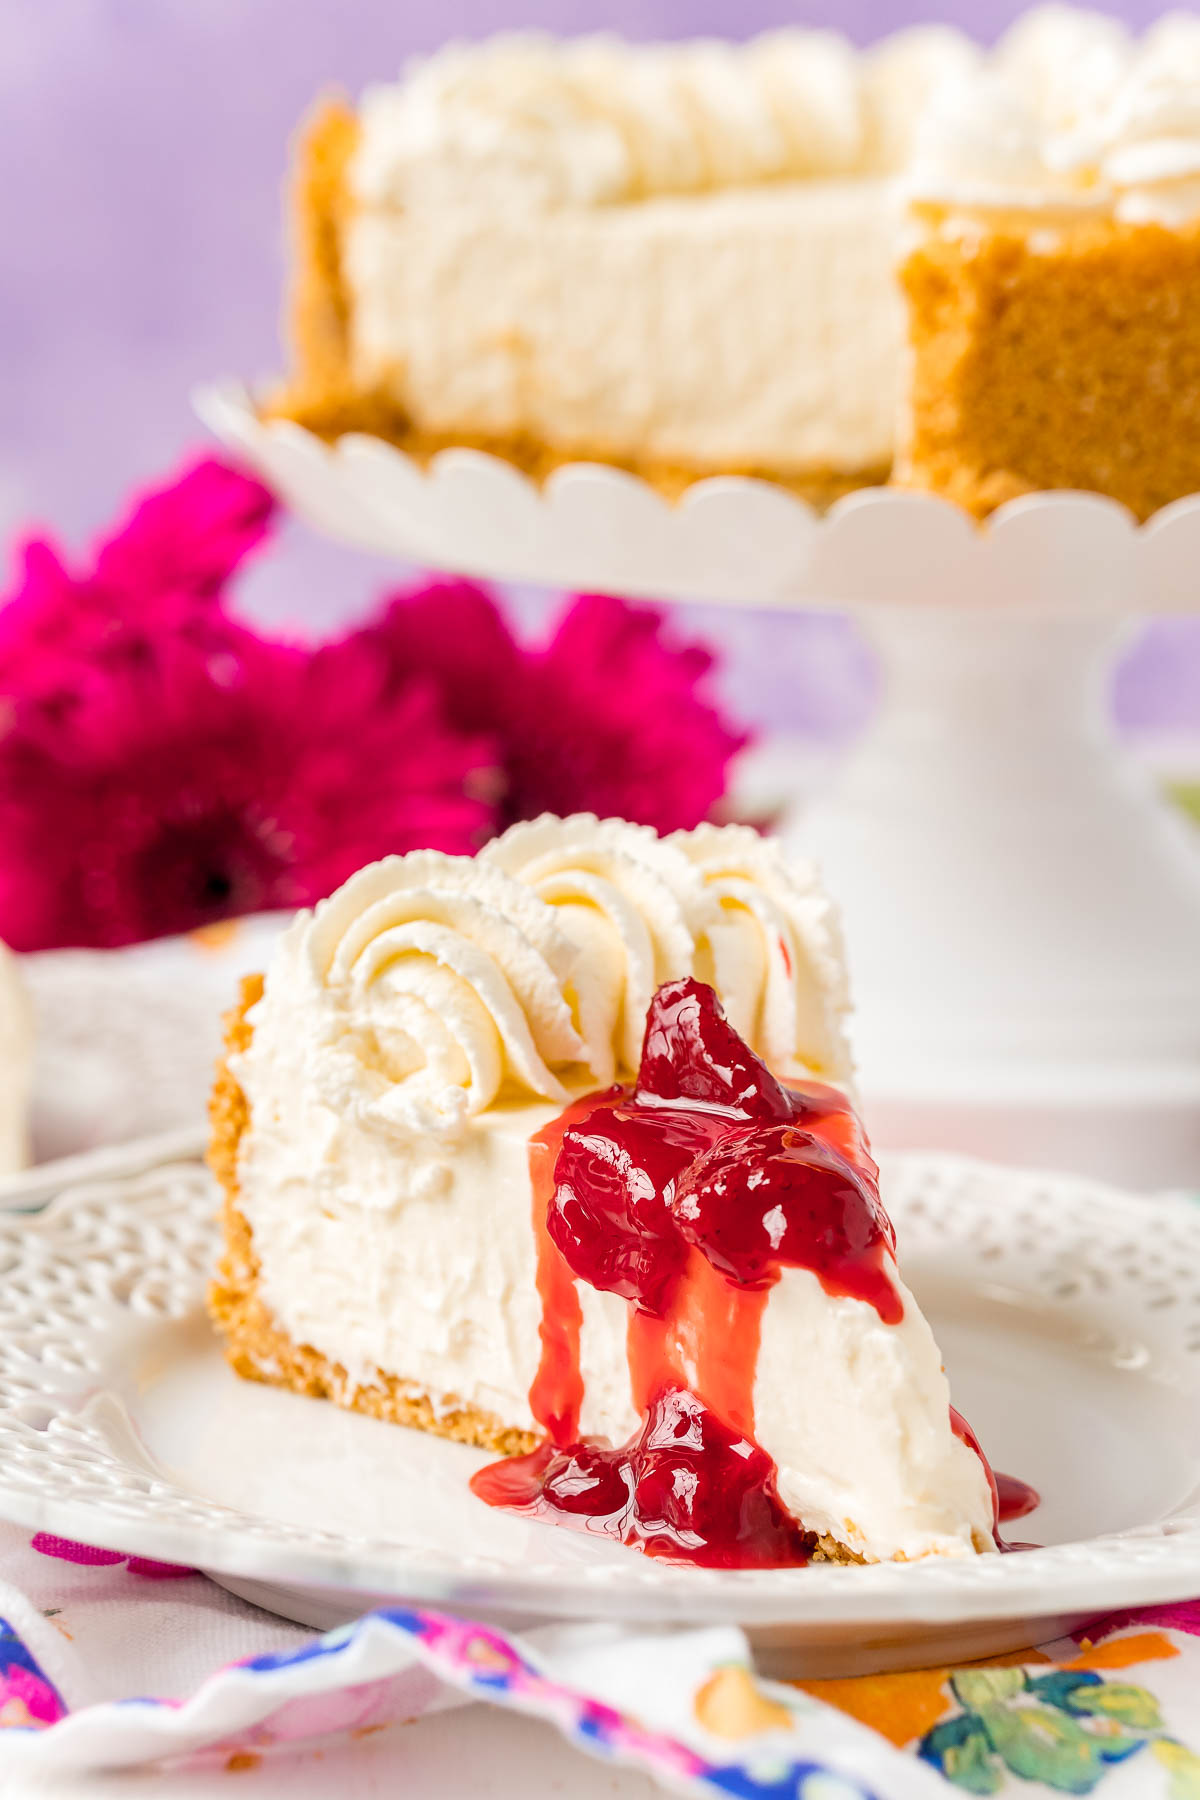 Cheesecake slice on white plate topped with whipped cream and strawberry sauce.